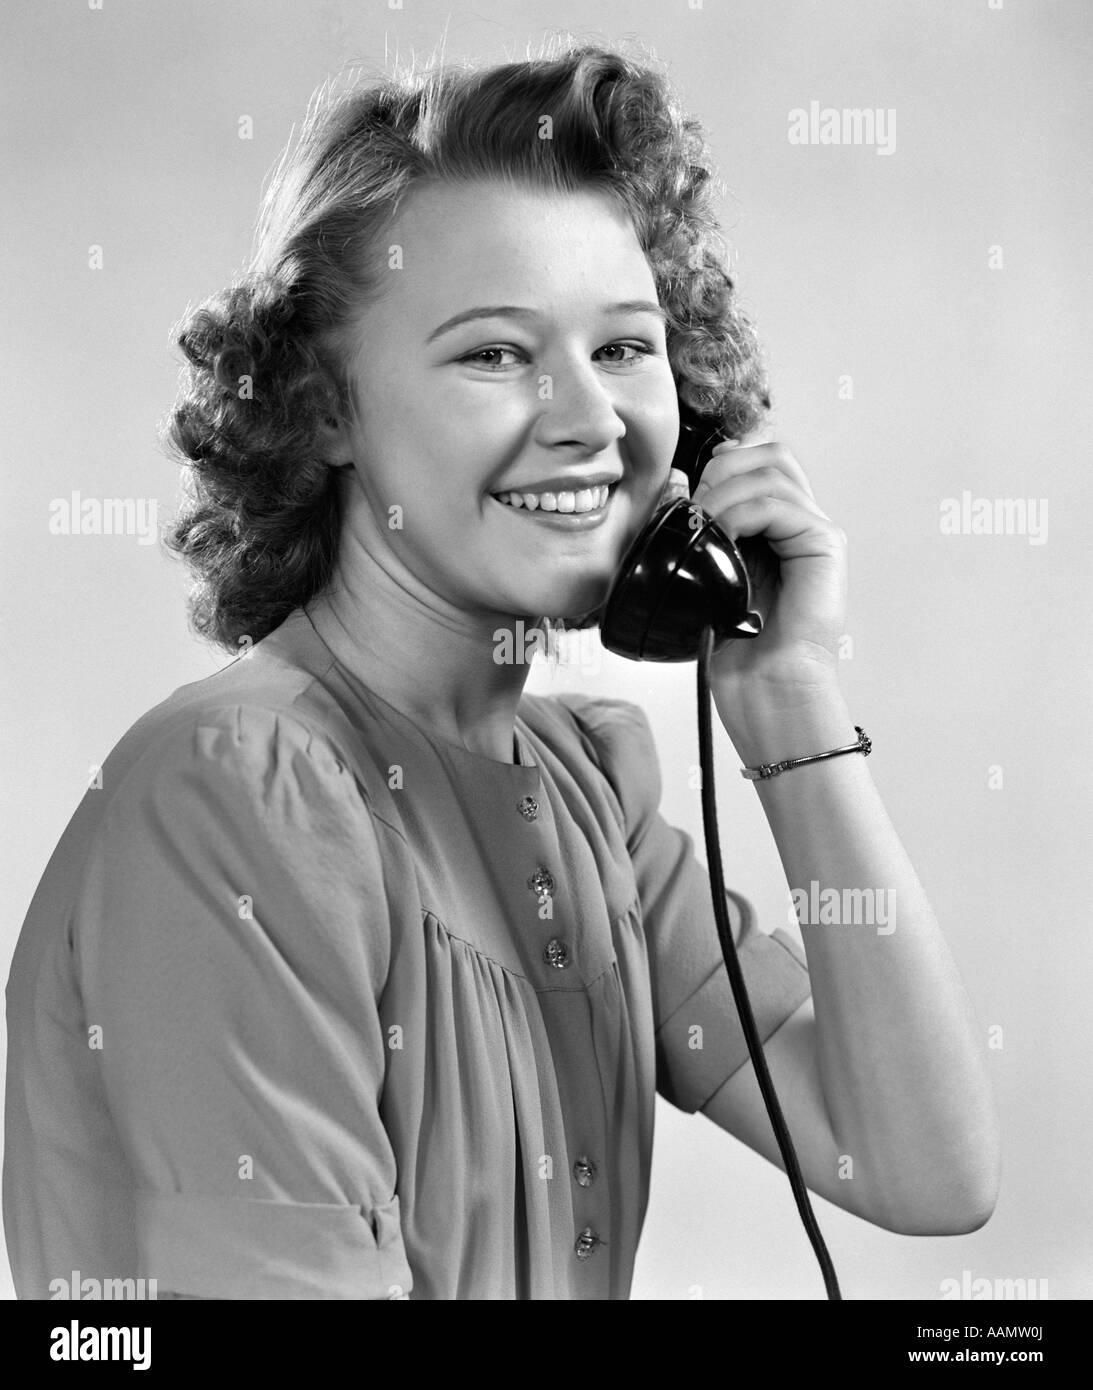 1940s YOUNG GIRL TALKING ON PHONE LOOKING AT CAMERA Stock Photo